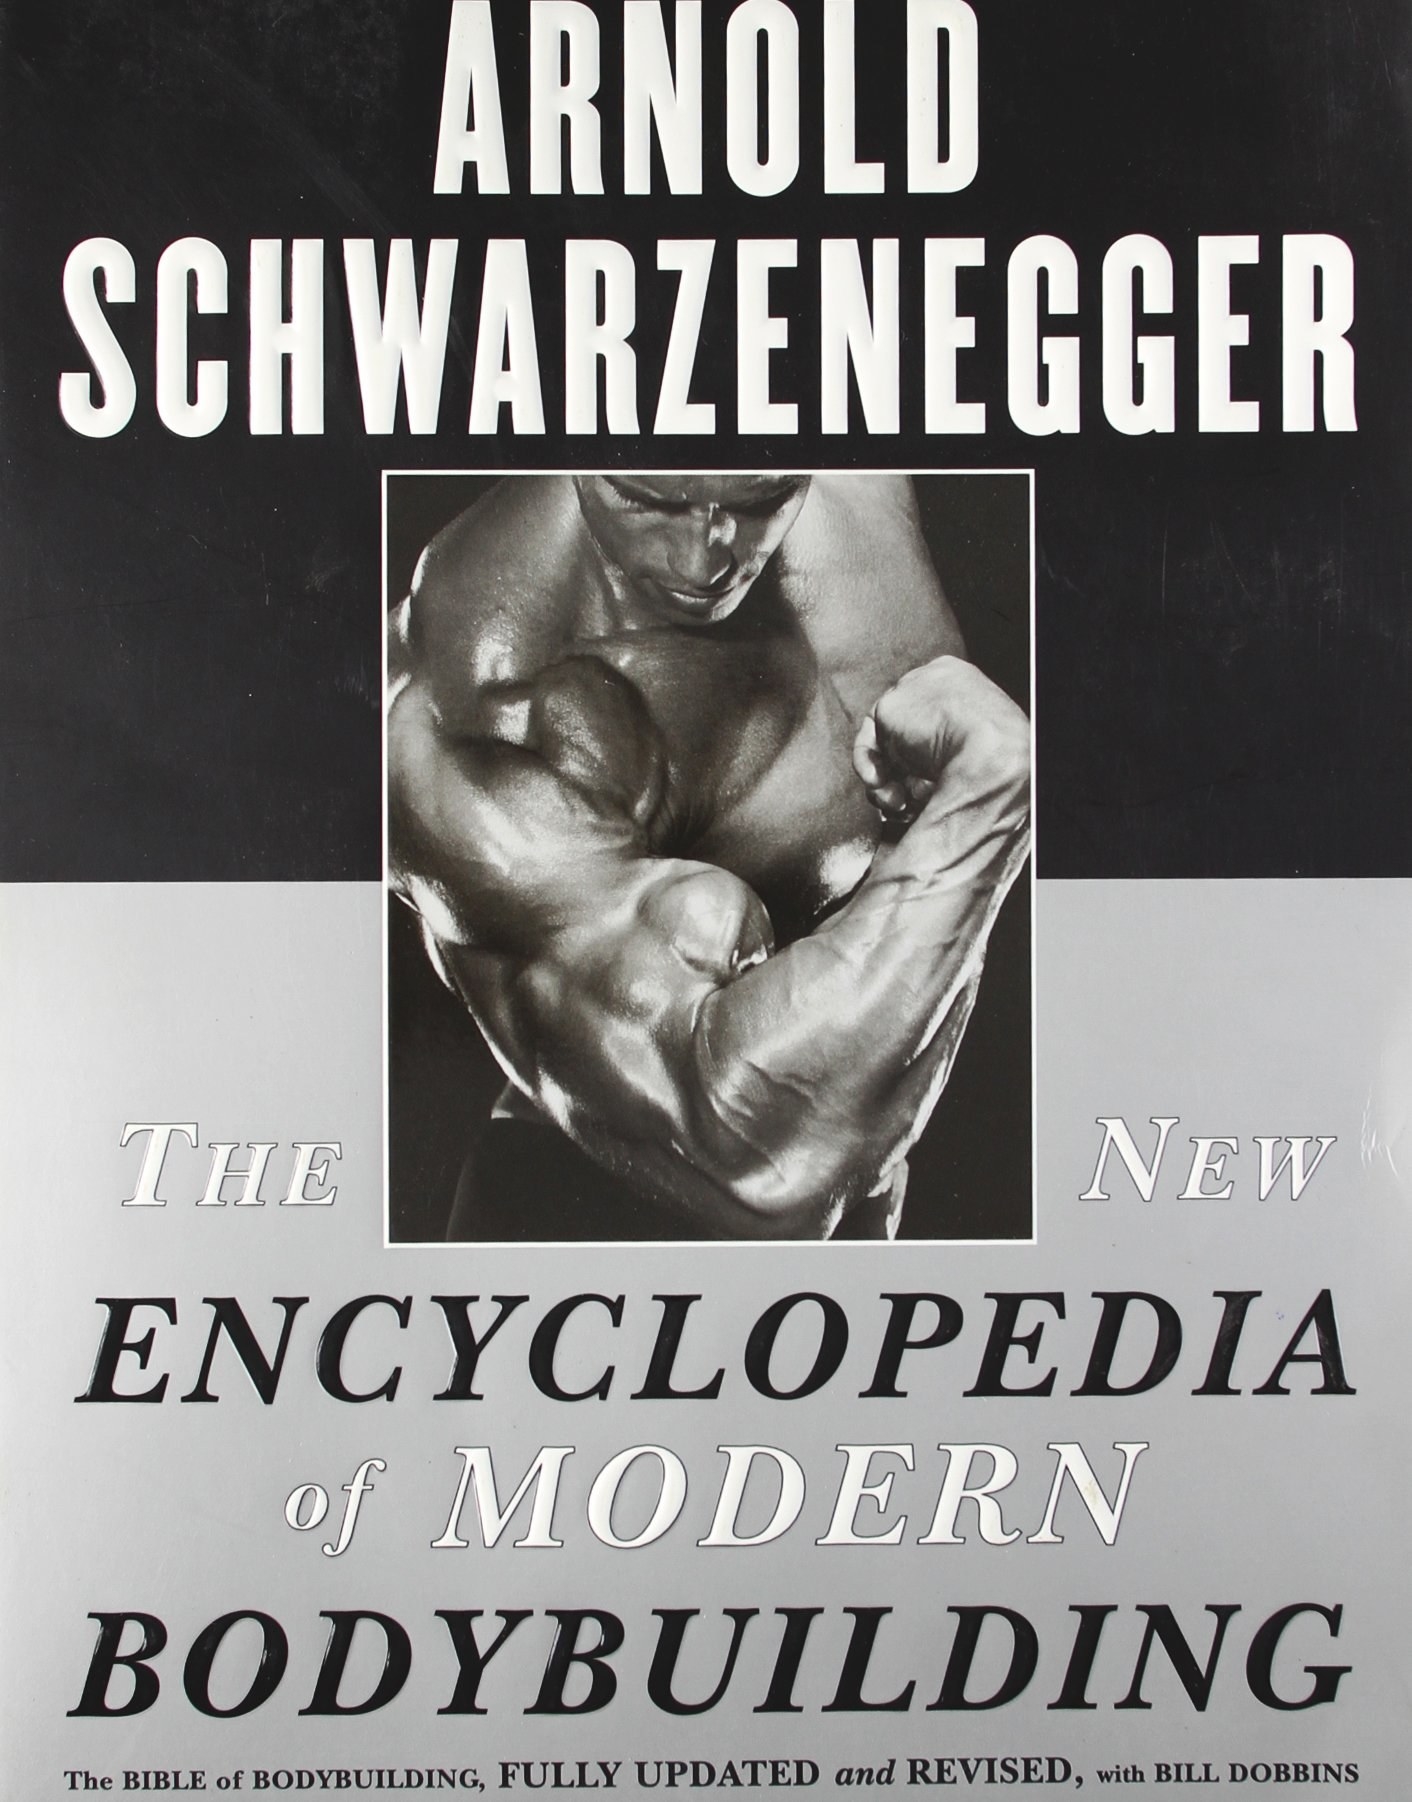 The cover of the book, showing young Arnold Schwarzenegger flexing his bicep